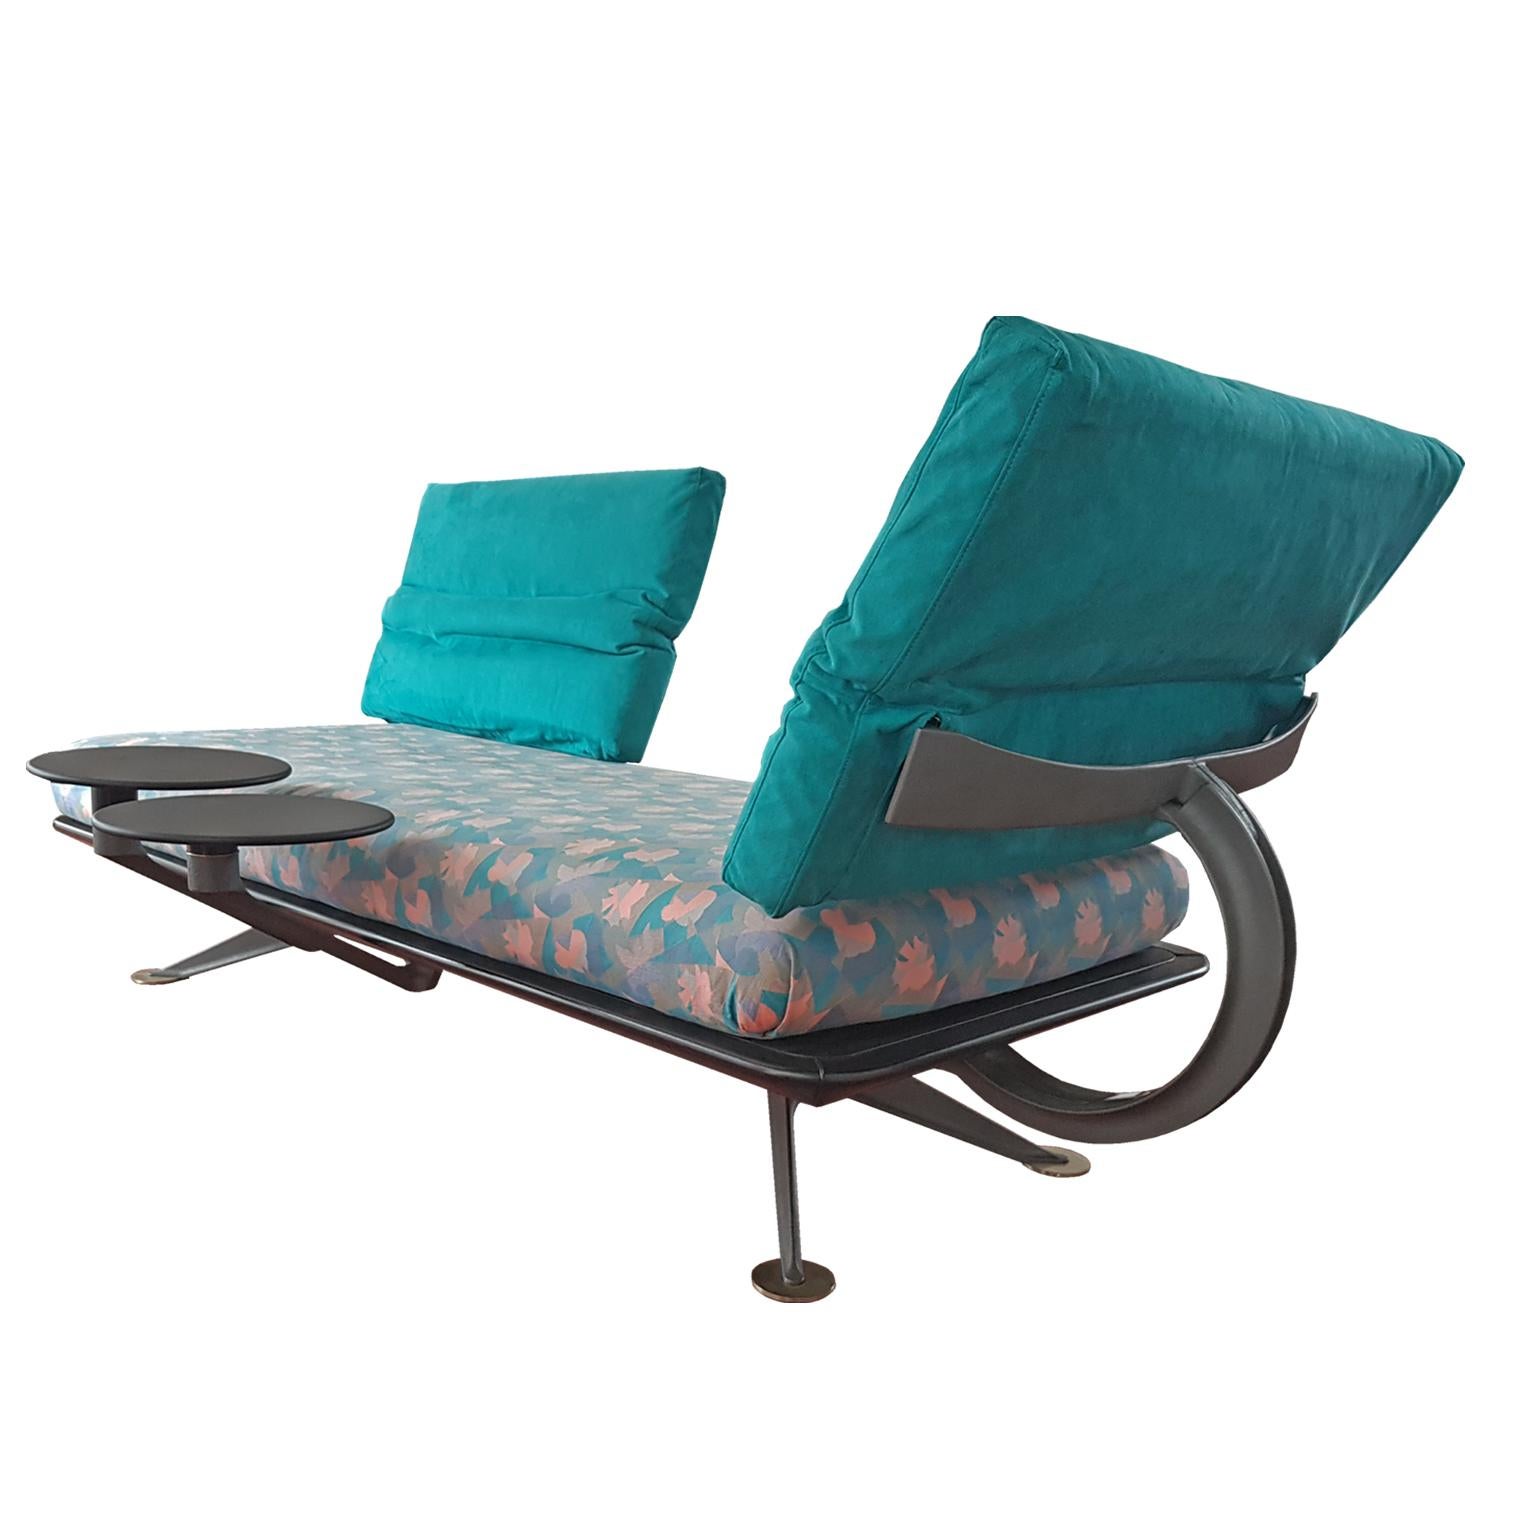 Italian B&B Turquoise and Floreal Fabric Daybed, Sofa with Back Rotation In Excellent Condition For Sale In Mornico al Serio ( BG), Lombardia